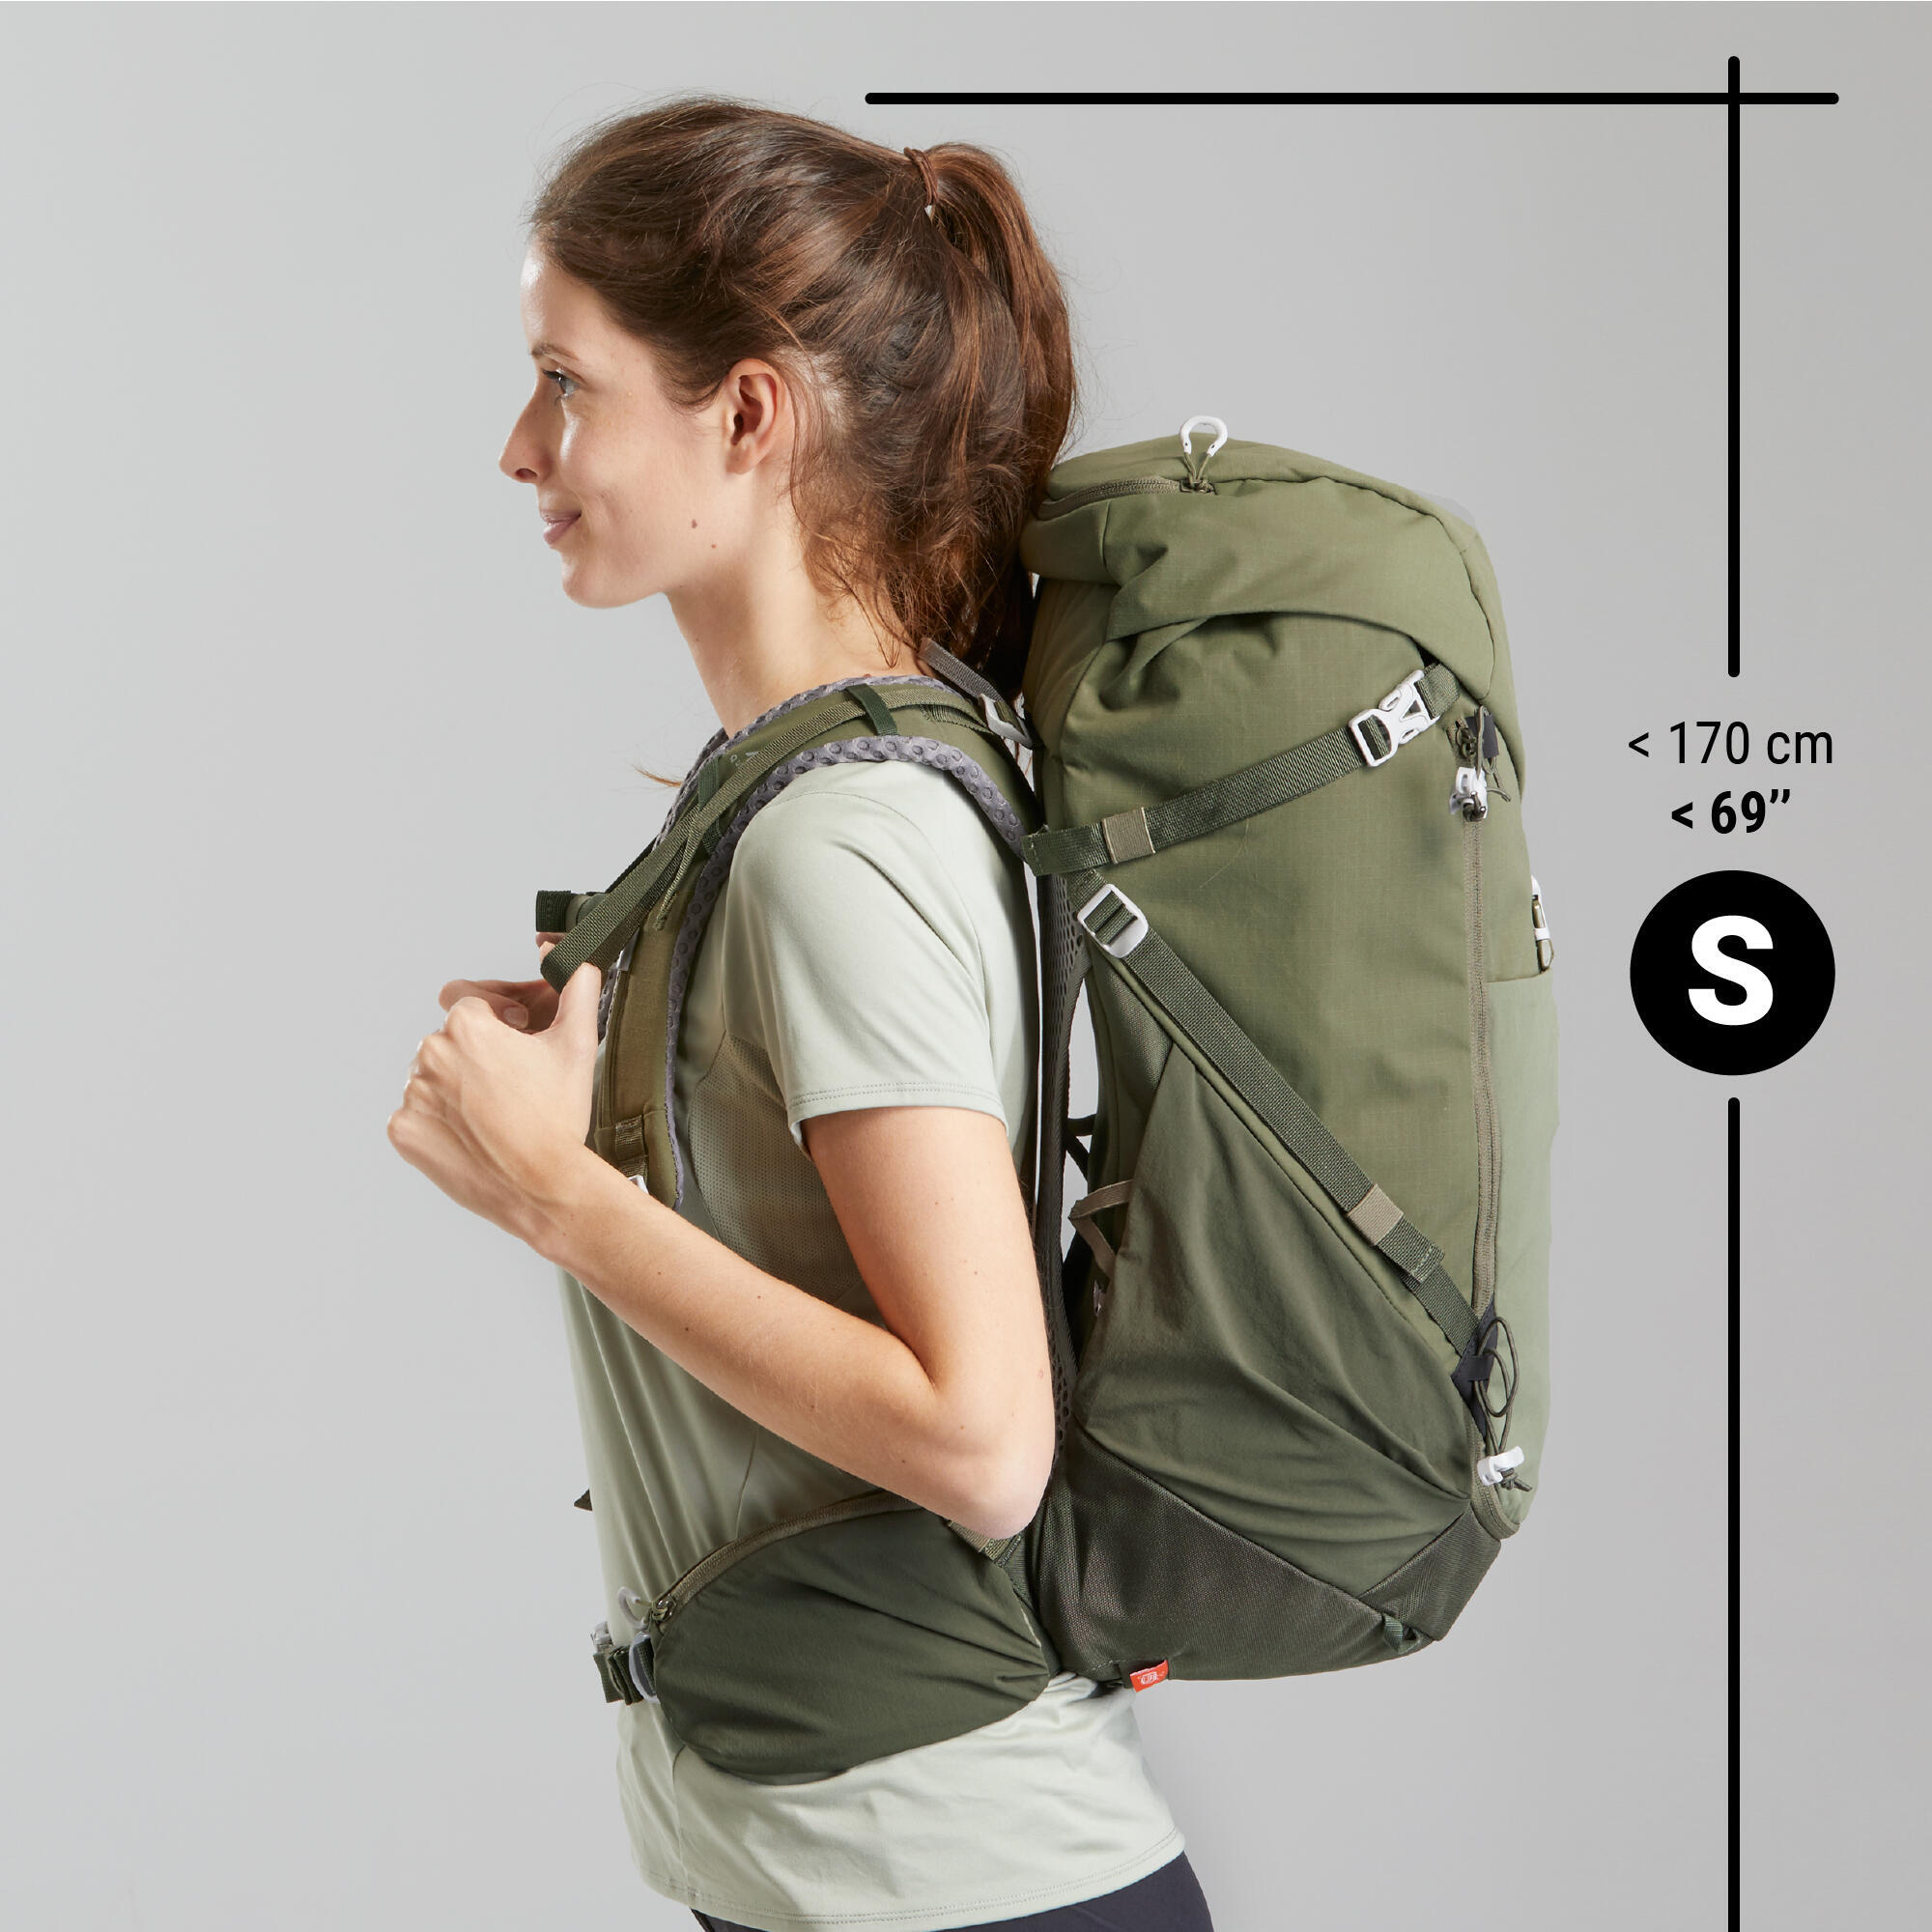 Mountain hiking backpack 40L - MH500 5/13